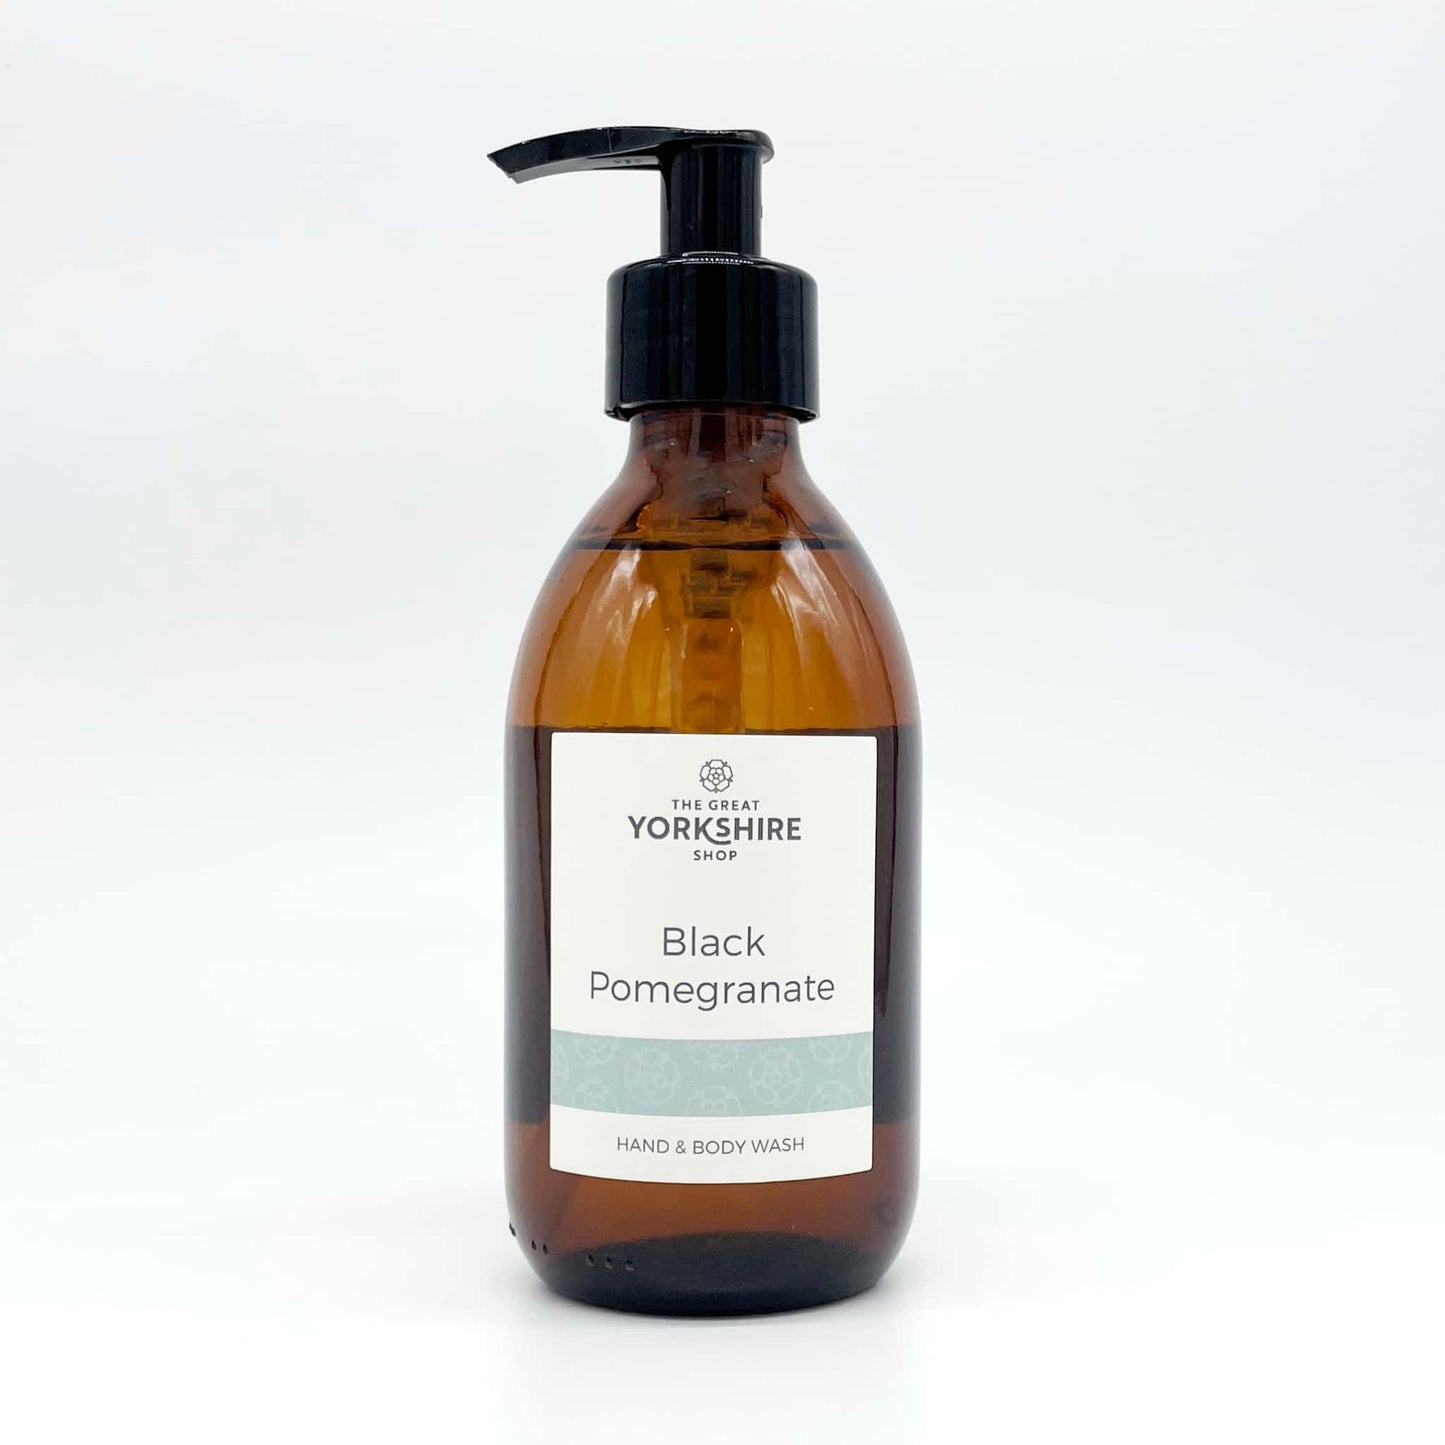 Black Pomegranate Hand & Body Wash - The Great Yorkshire Shop